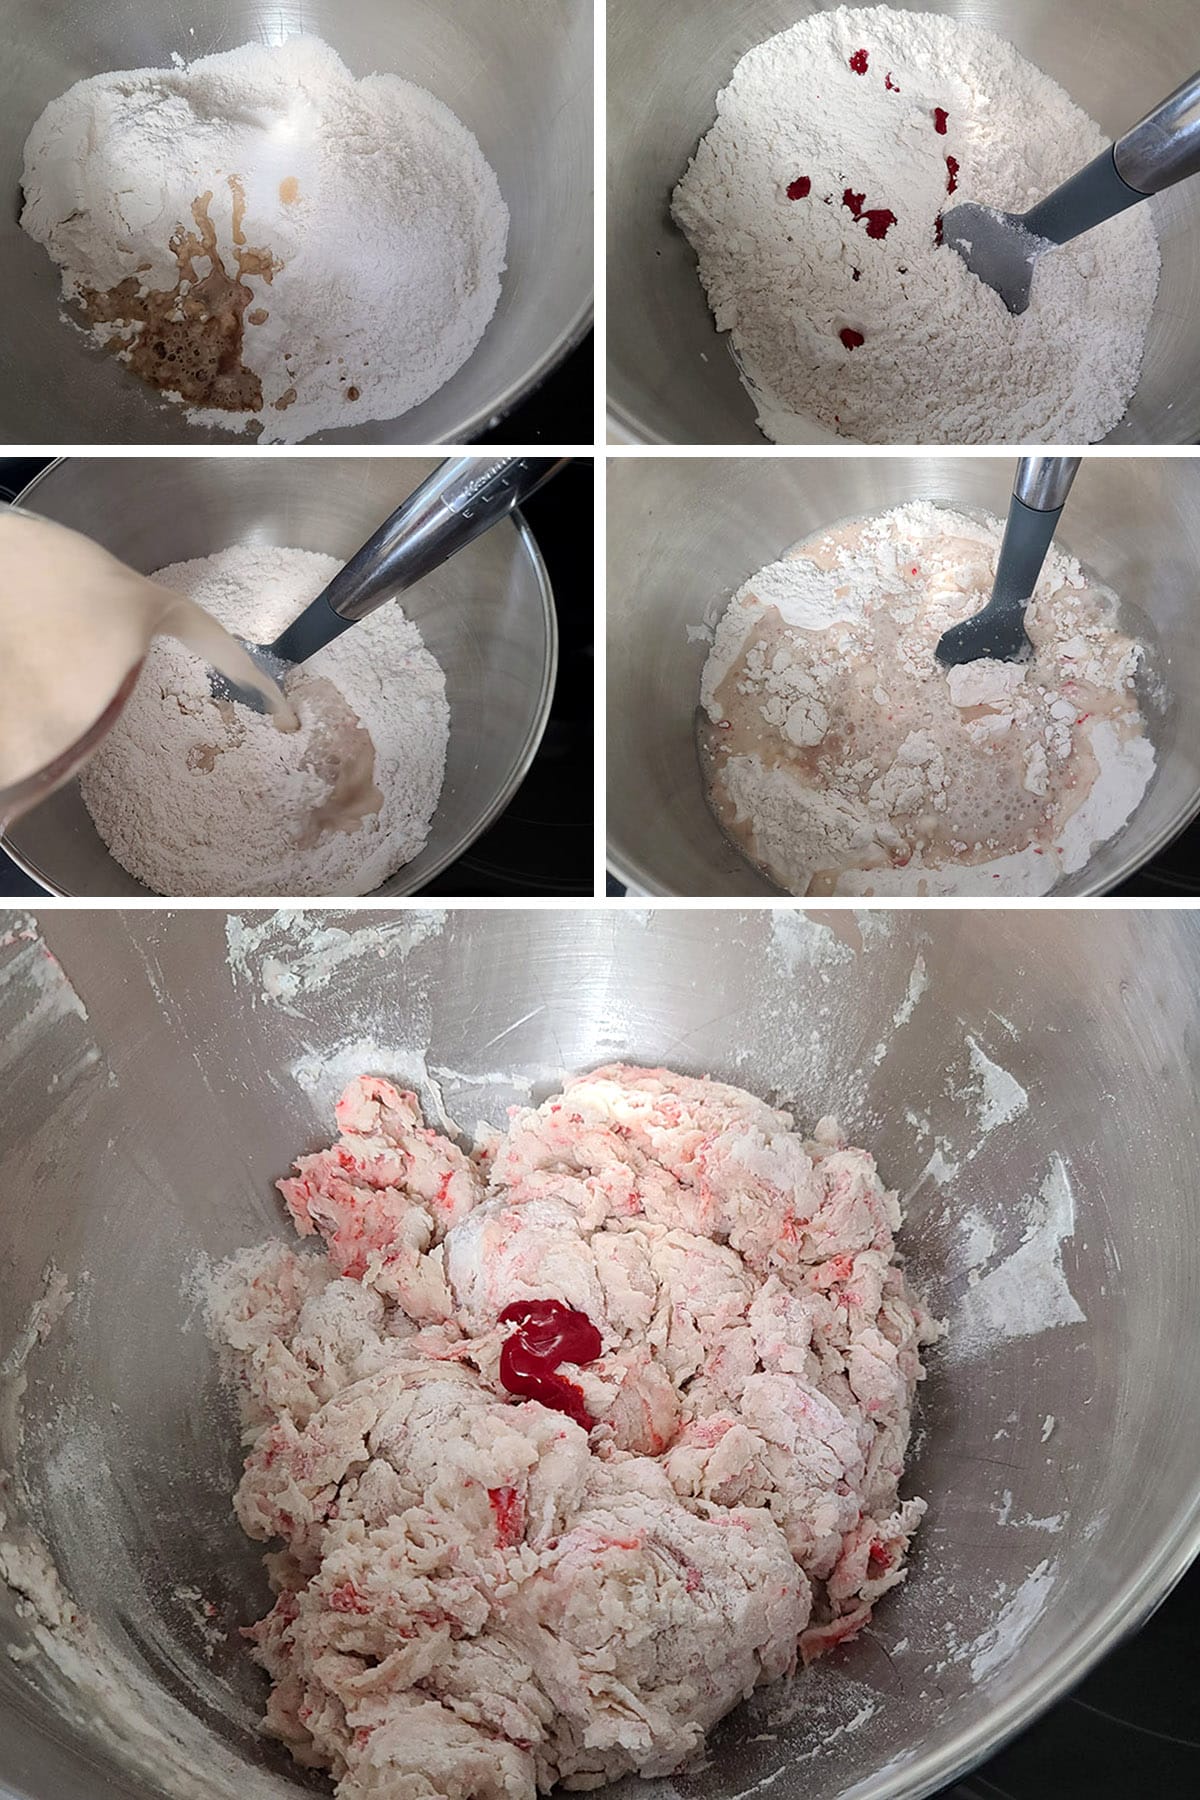 A 5 part image showing the dough ingredients being mixed into a shaggy dough.